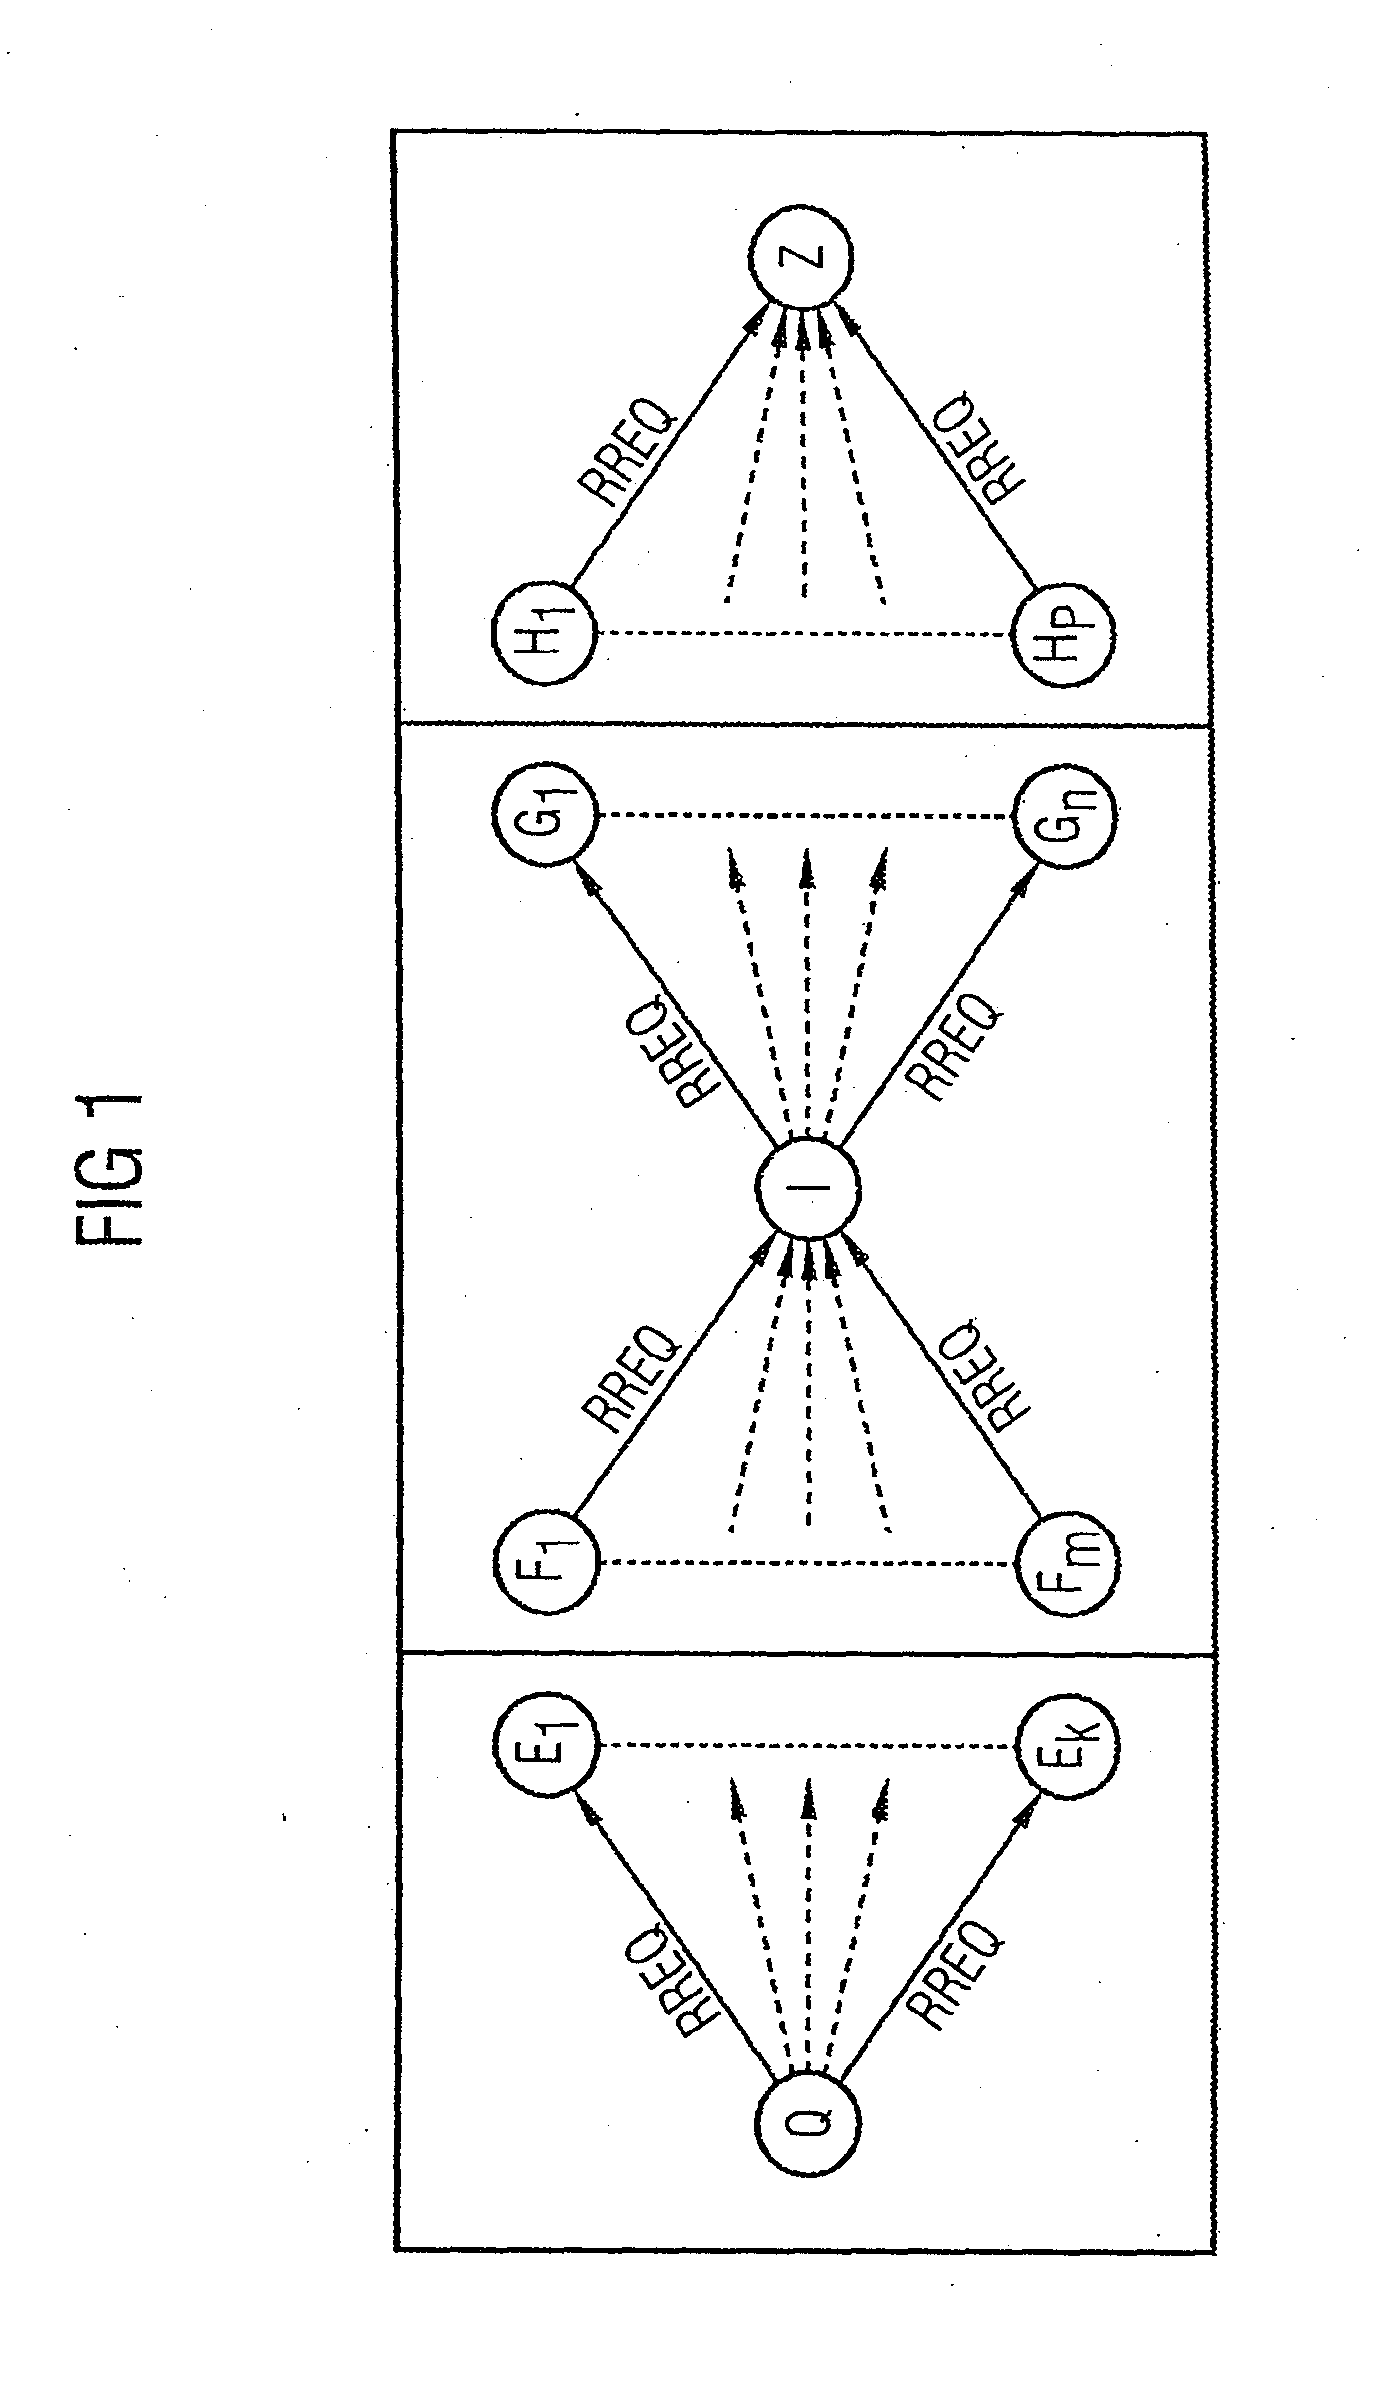 Methods, Networks and Network Nodes for Selecting a Route